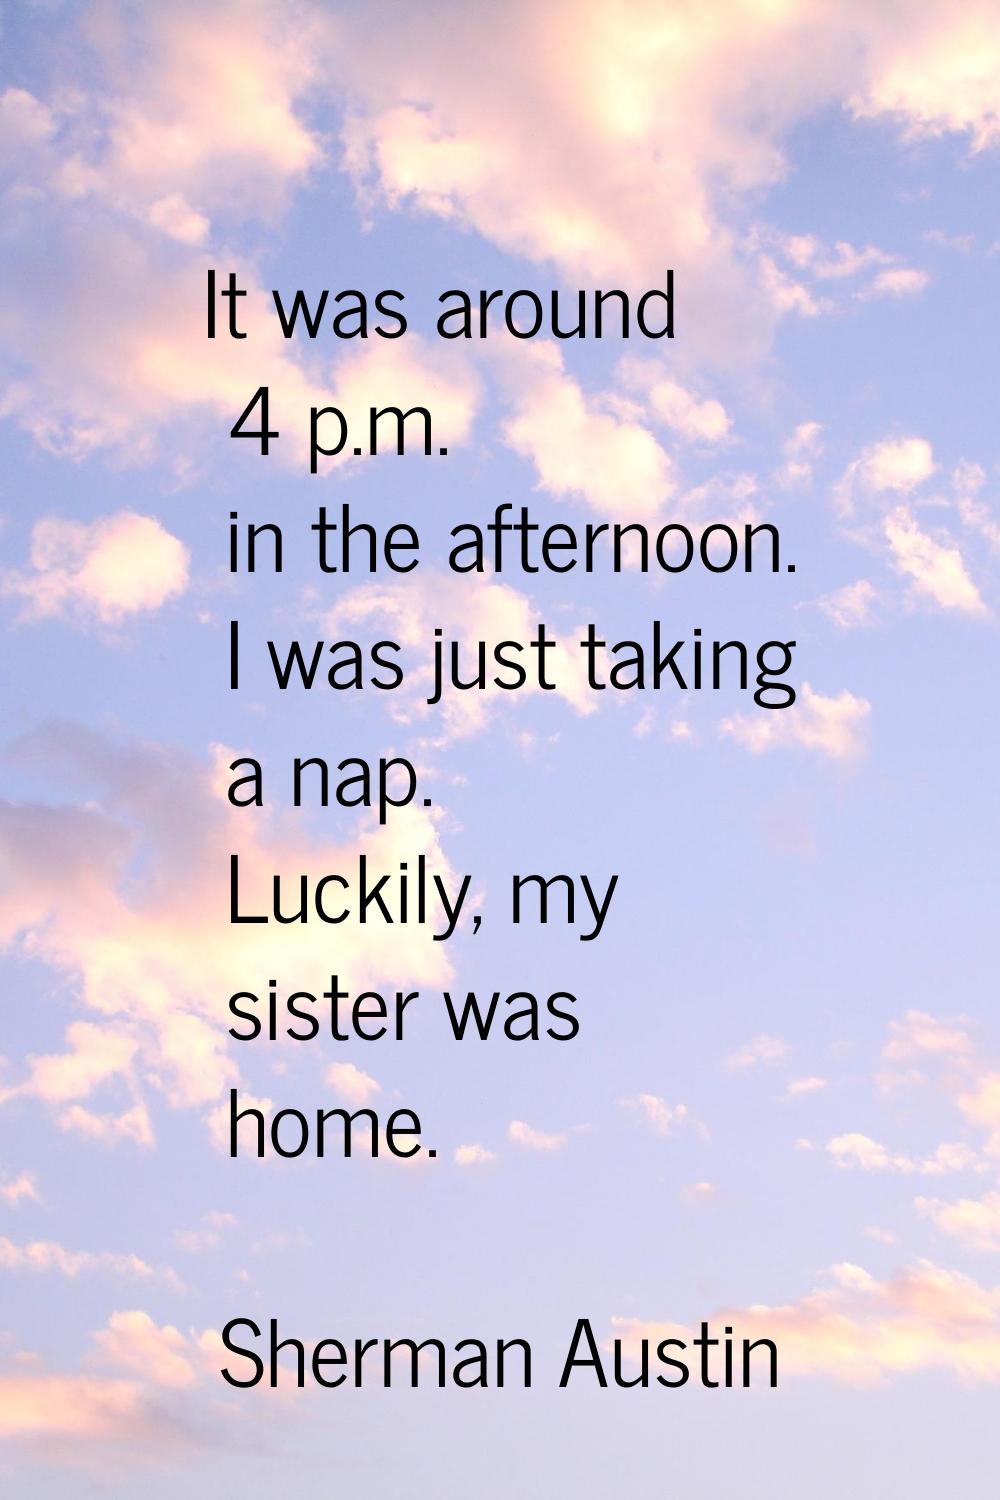 It was around 4 p.m. in the afternoon. I was just taking a nap. Luckily, my sister was home.